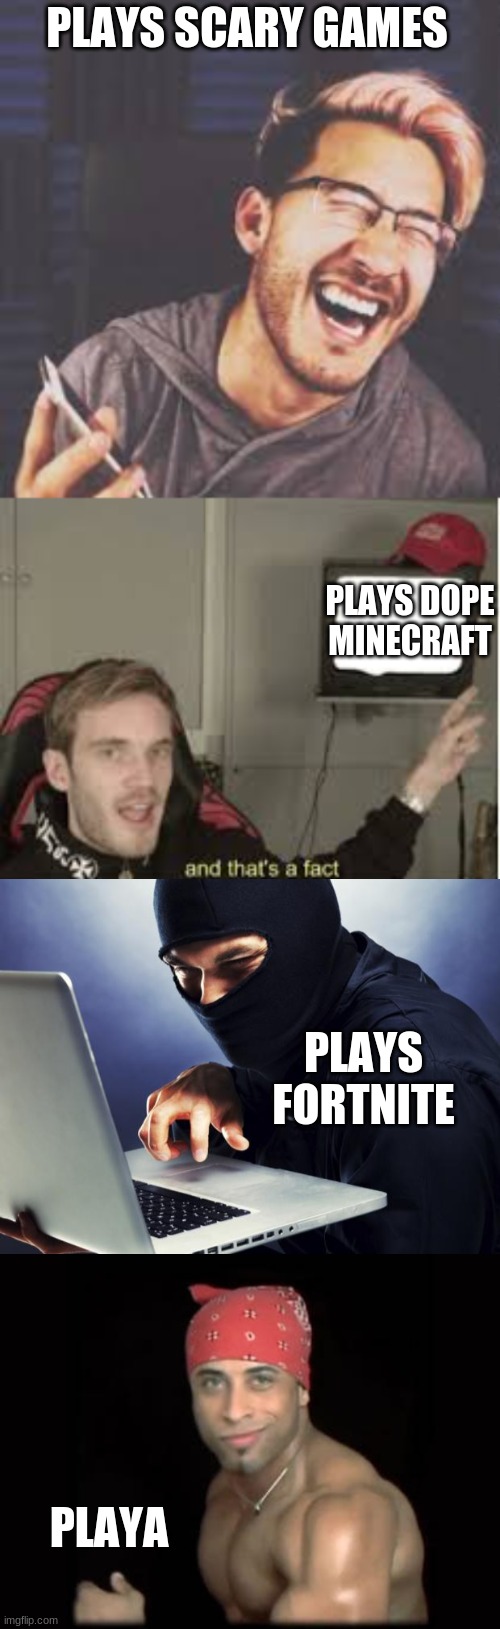 Types of gamers | PLAYS SCARY GAMES; PLAYS DOPE MINECRAFT; PLAYS FORTNITE; PLAYA | image tagged in markiplier lol,and thats a fact,ninja,ricardo milosss | made w/ Imgflip meme maker